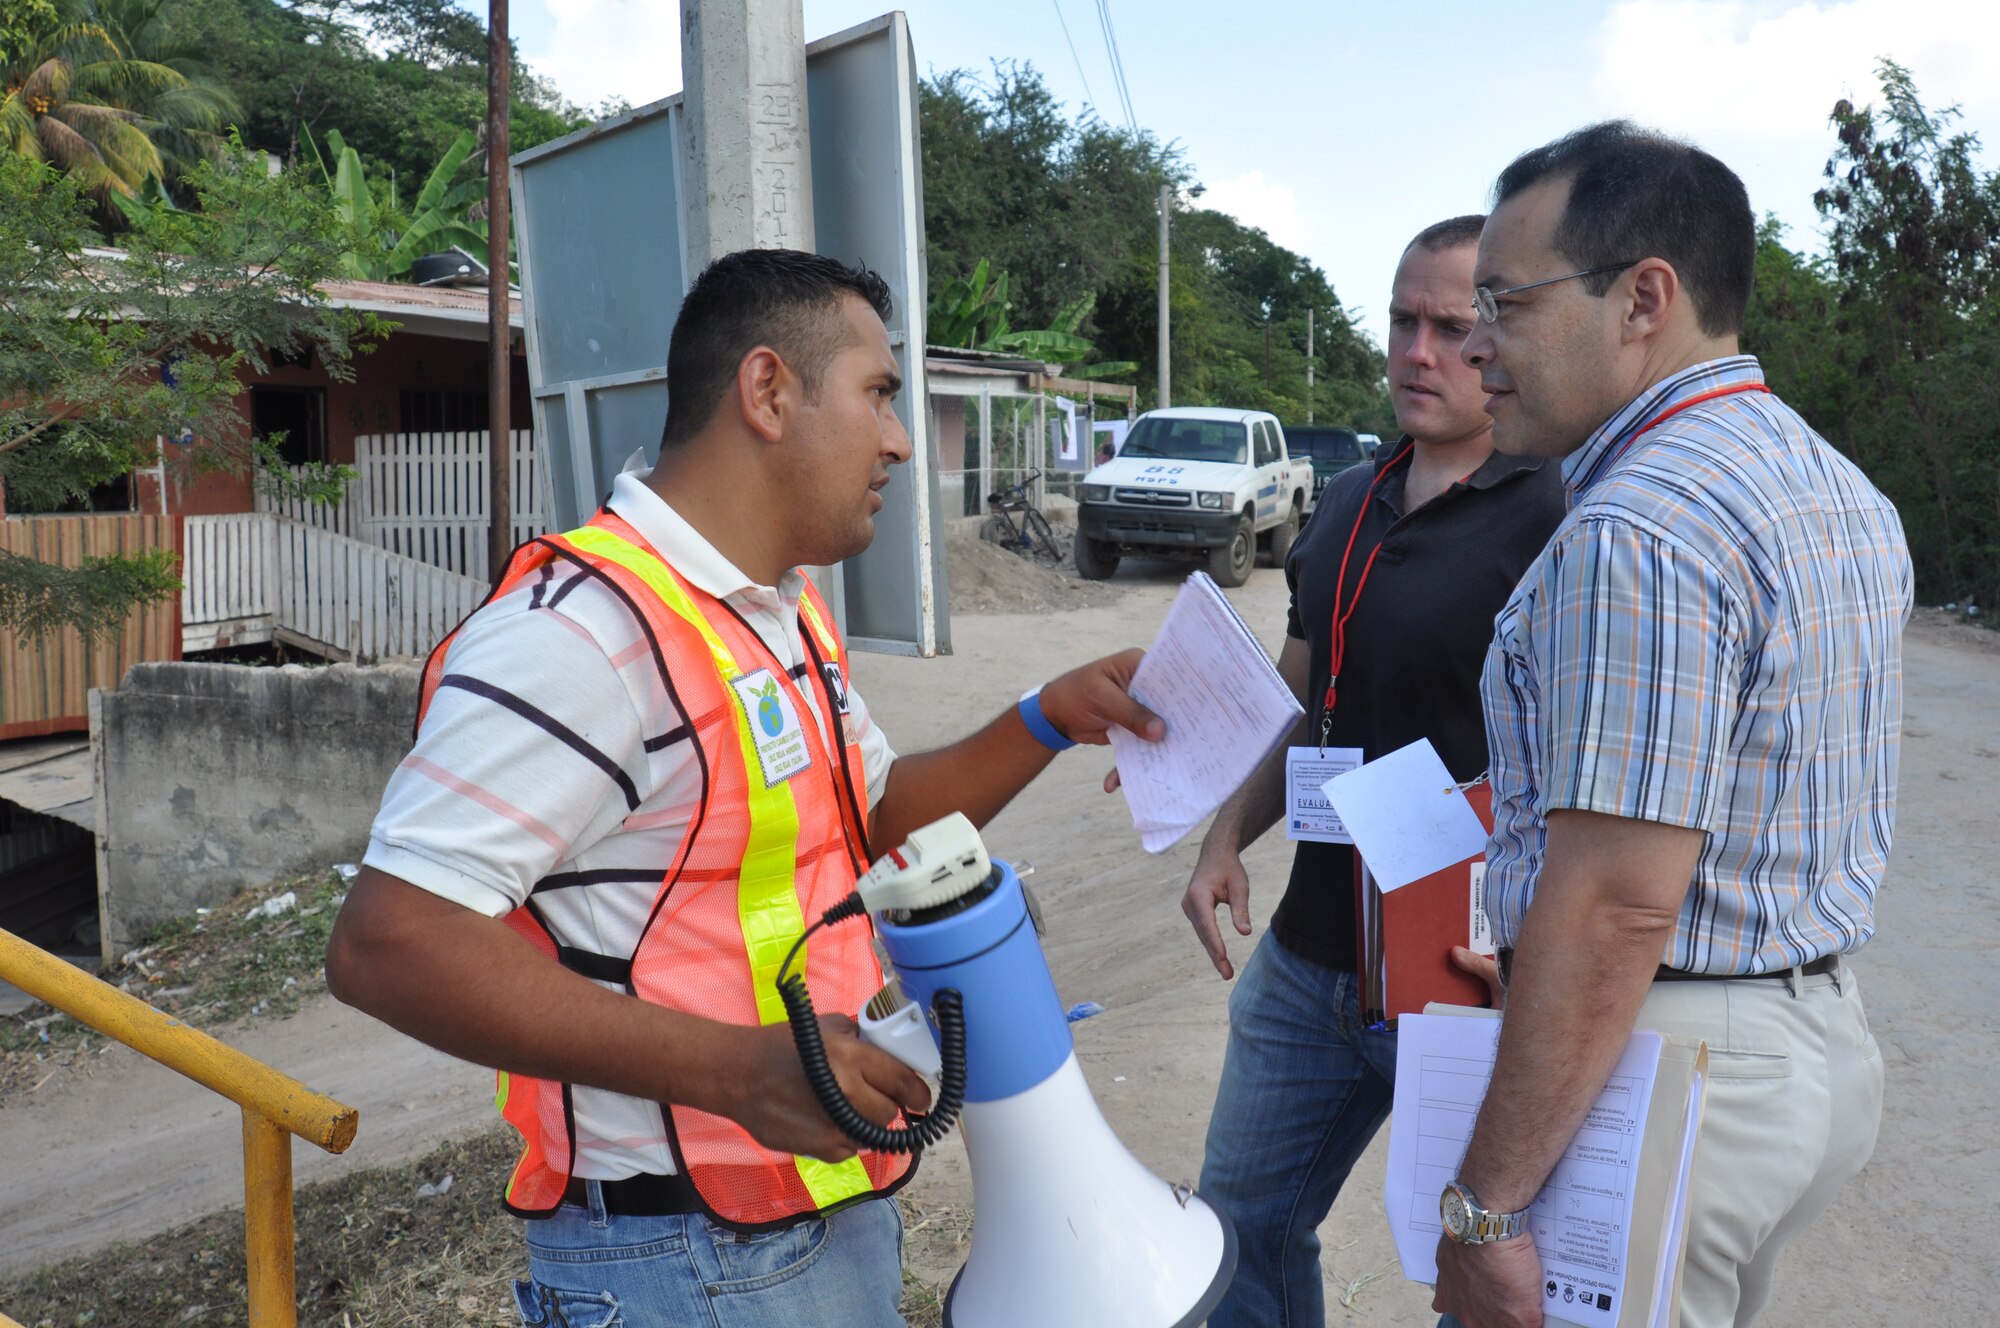 SAN PEDRO SULA, Honduras - Dr. Ricardo Aviles, a Medical Officer at the Medical Element, and Capt. Tyler Grunewald, the deputy director of MEDEL operations setion, speak with a community member about the COPECO exercise here last month. Joint Task Force-Bravo, Soto Cano Air Base, Honduras, sent members of the Central America Survey Assessment Team to serve as evaluators during a two-day Foreign Humanitarian Assistance and Disaster Relief preparedness exercise in the San Pedro Sula valley last month. (U.S. Air Force photo/Capt. Candice Allen)